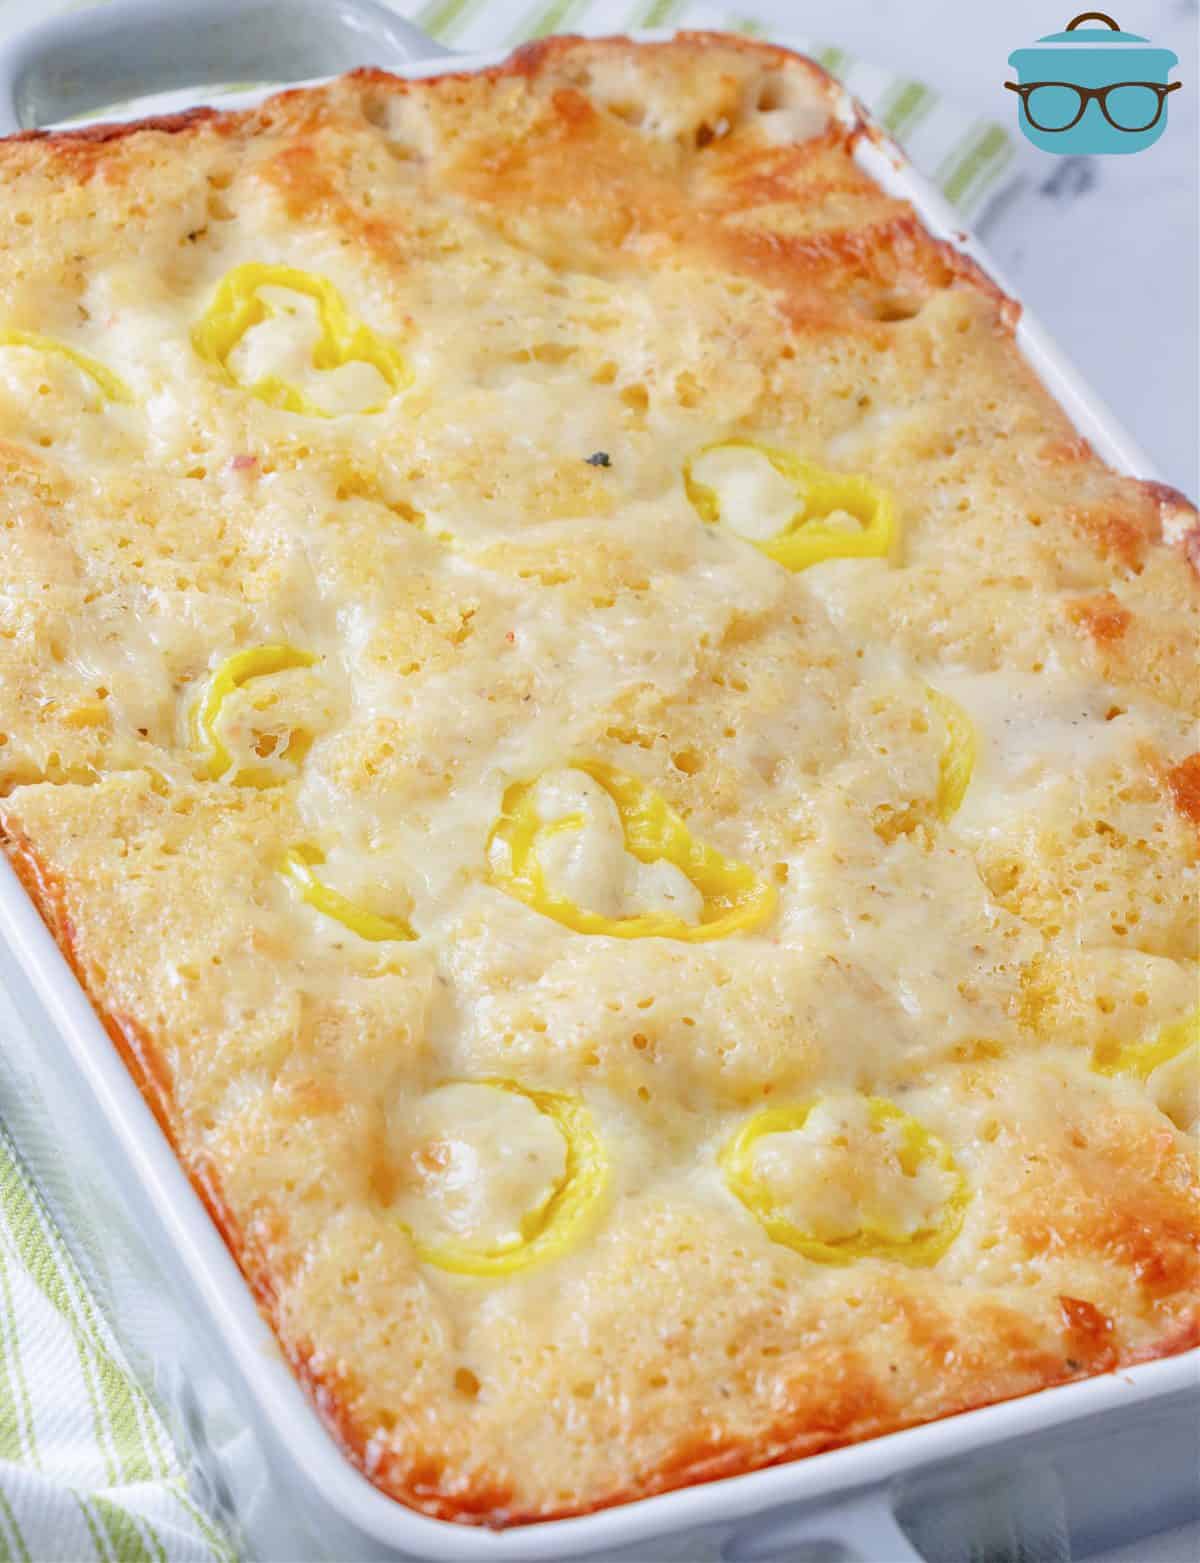 fully baked chicken cornbread casserole in a white rectangle baking dish.